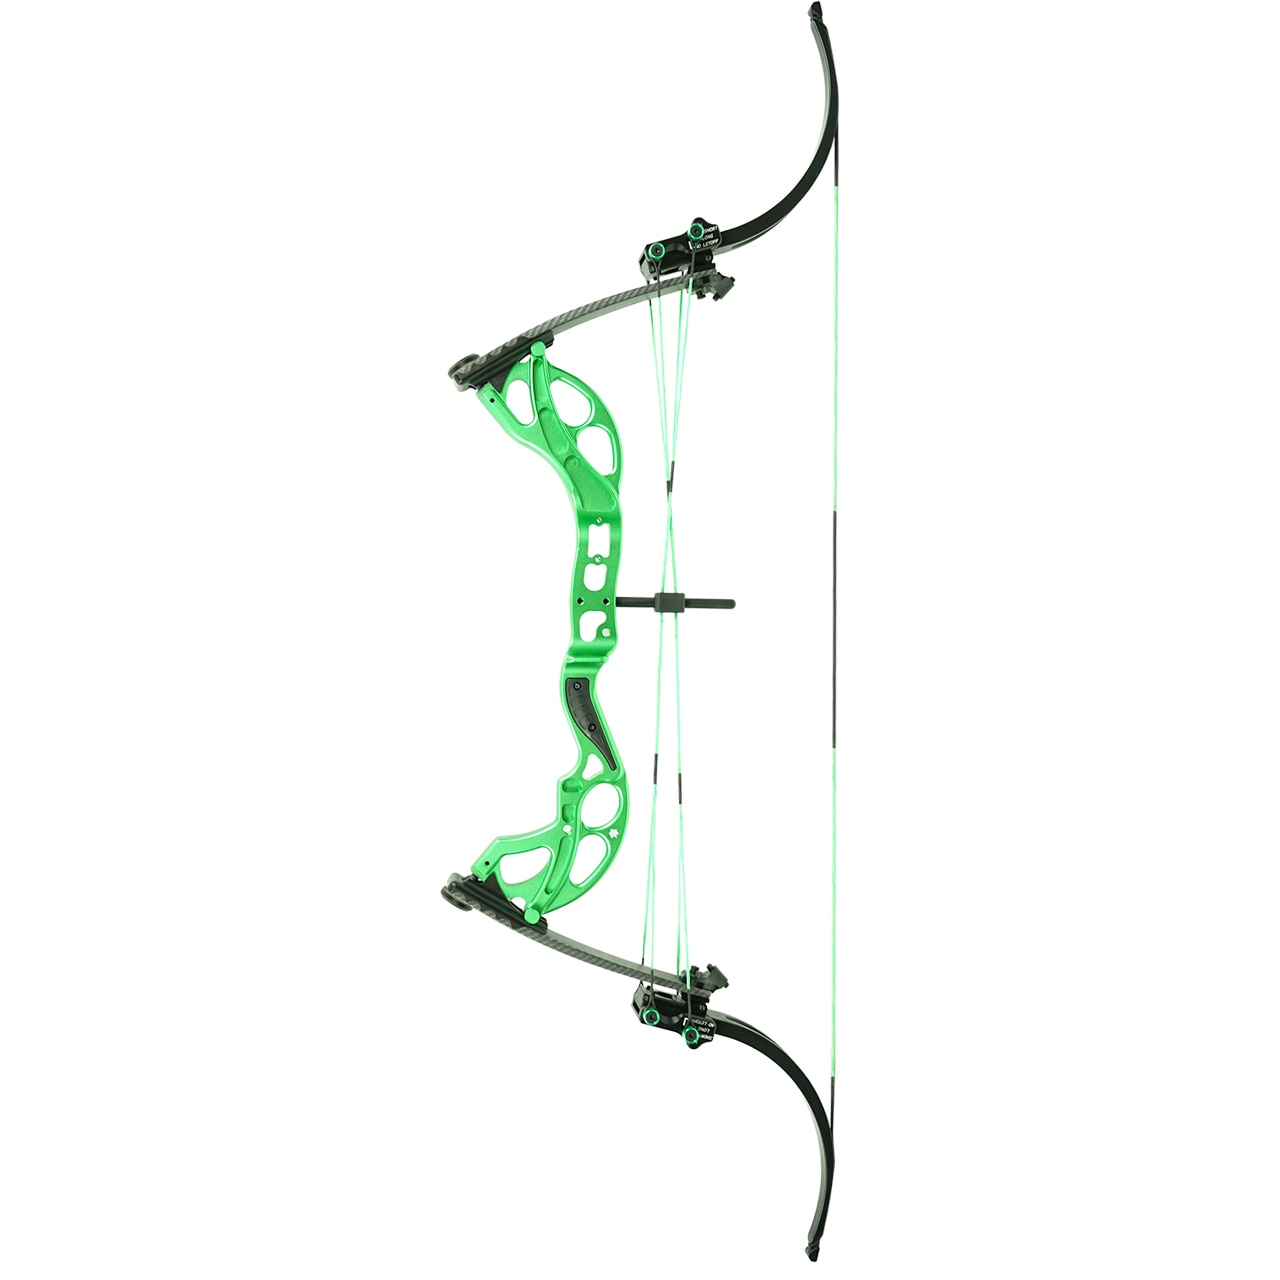 Muzzy Lime Green Bowfishing Line - Bowtreader